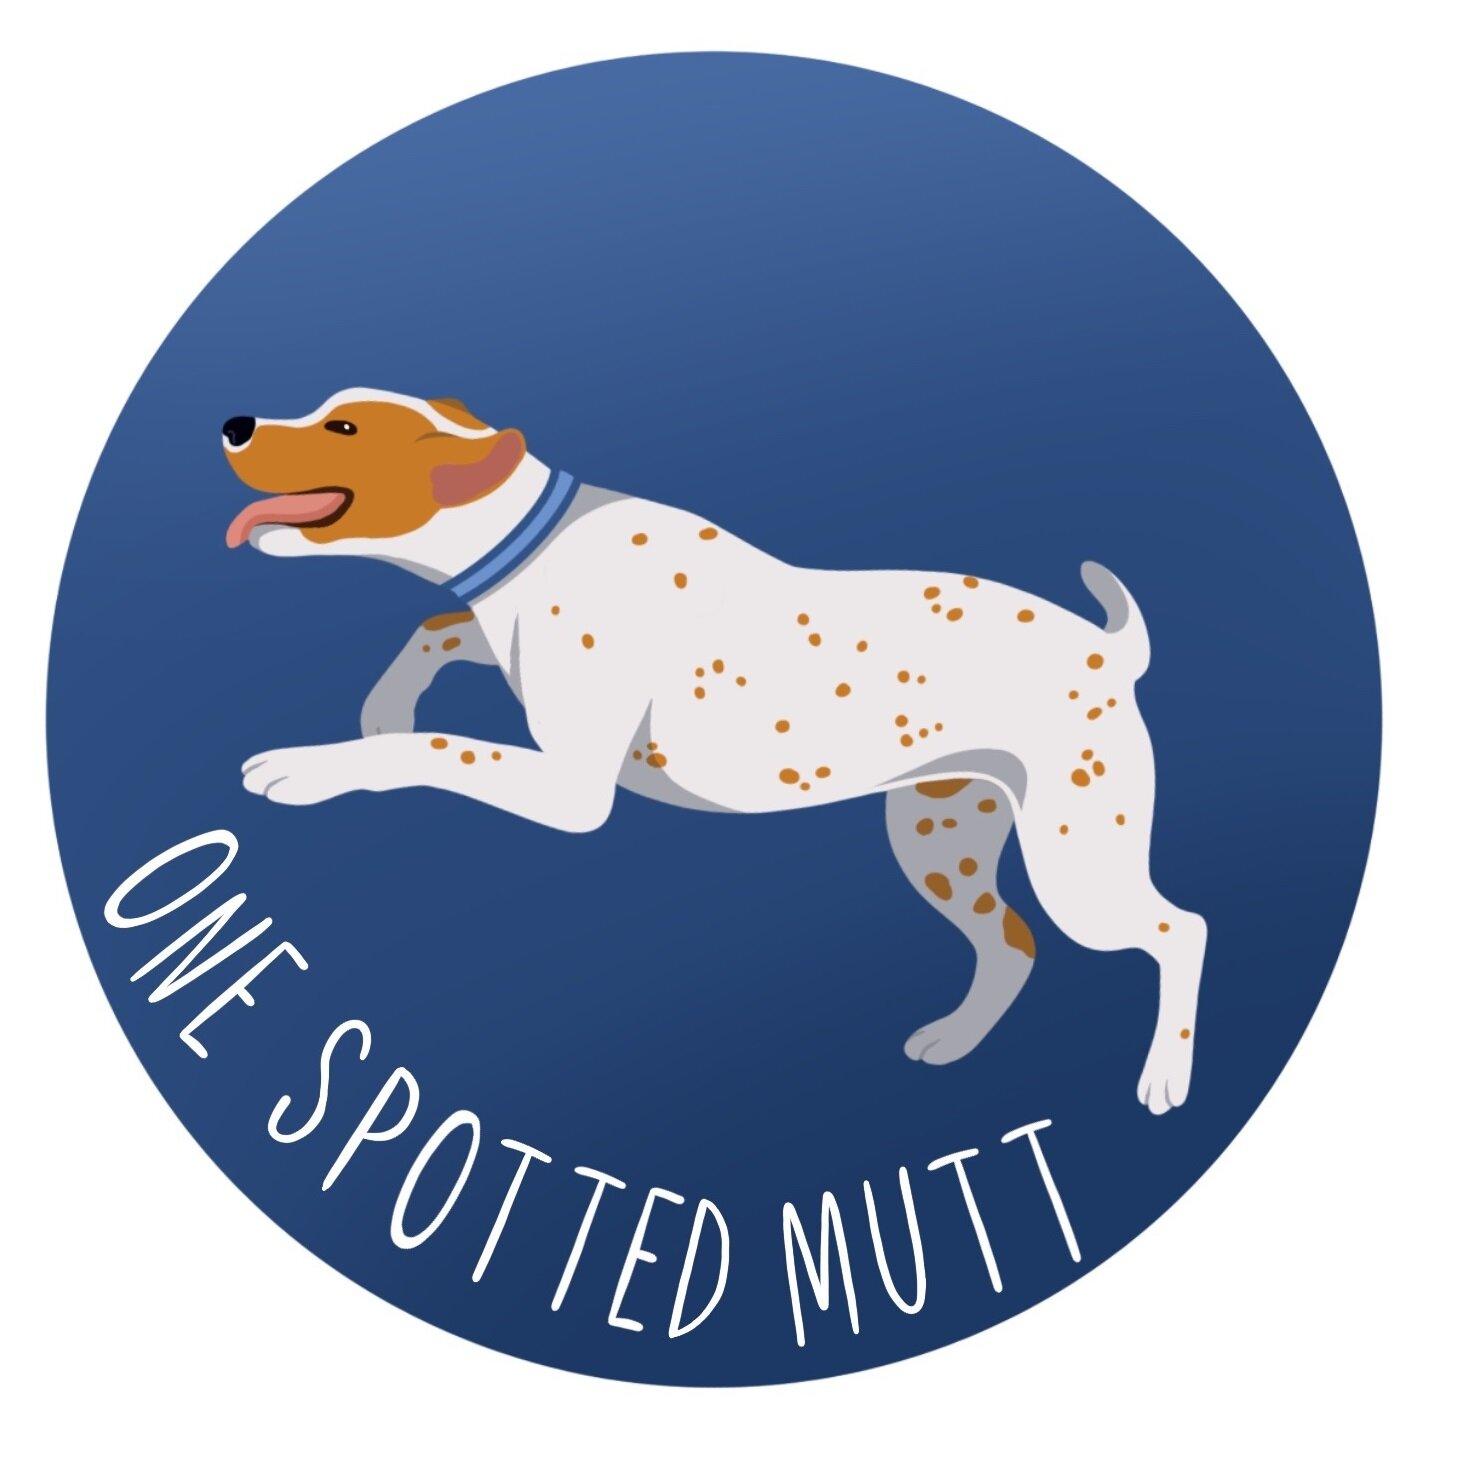 One Spotted Mutt